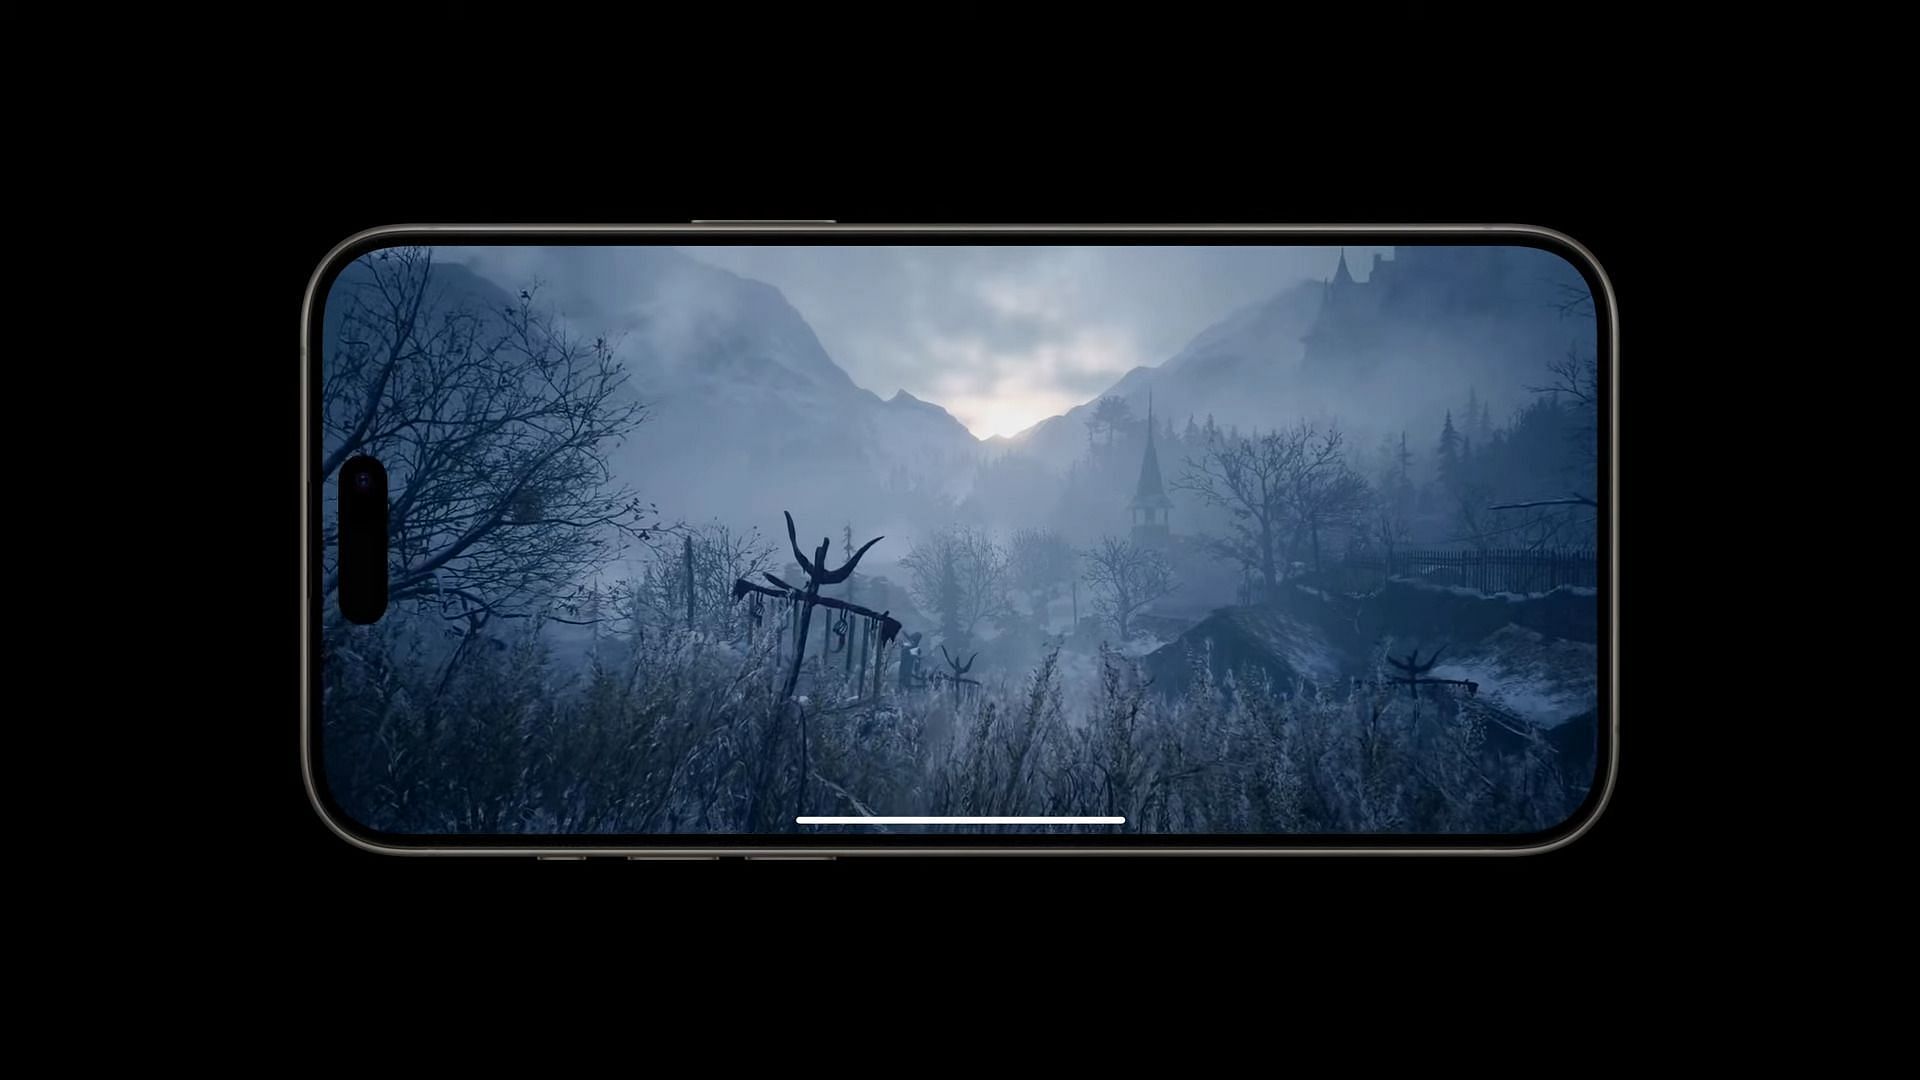 Resident Evil and other major AAA titles will make their way to the iPhone 15 Pro (Image via Apple/Camcom)